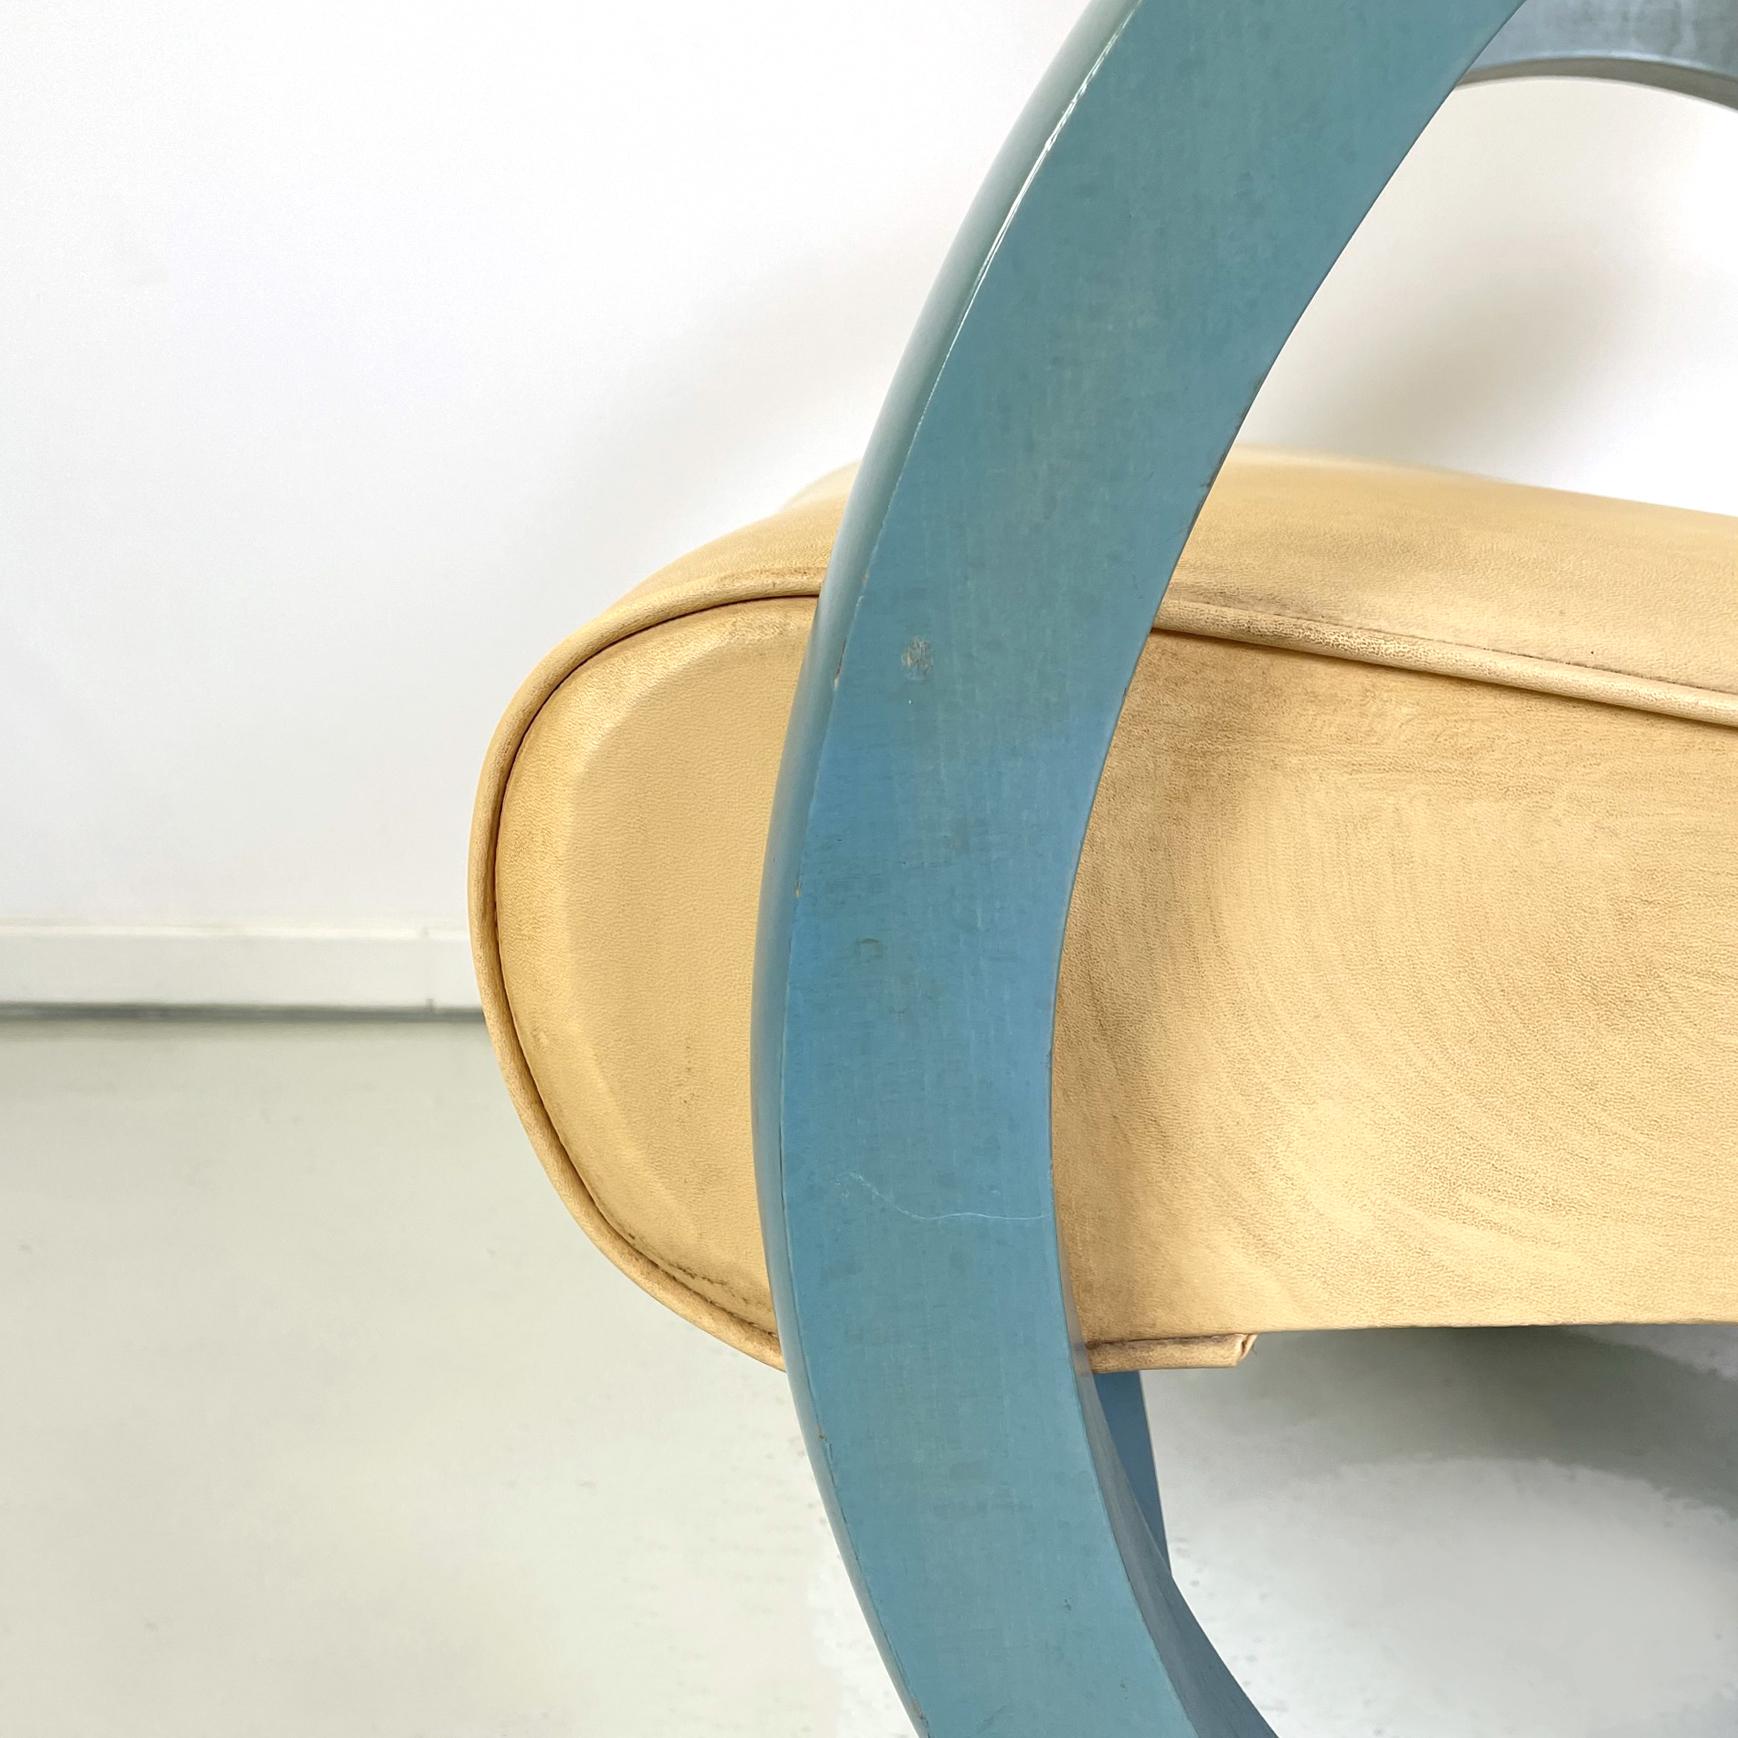 Italian Modern Armchair in Beige Leather and Light Blue Wood, 1980s For Sale 9